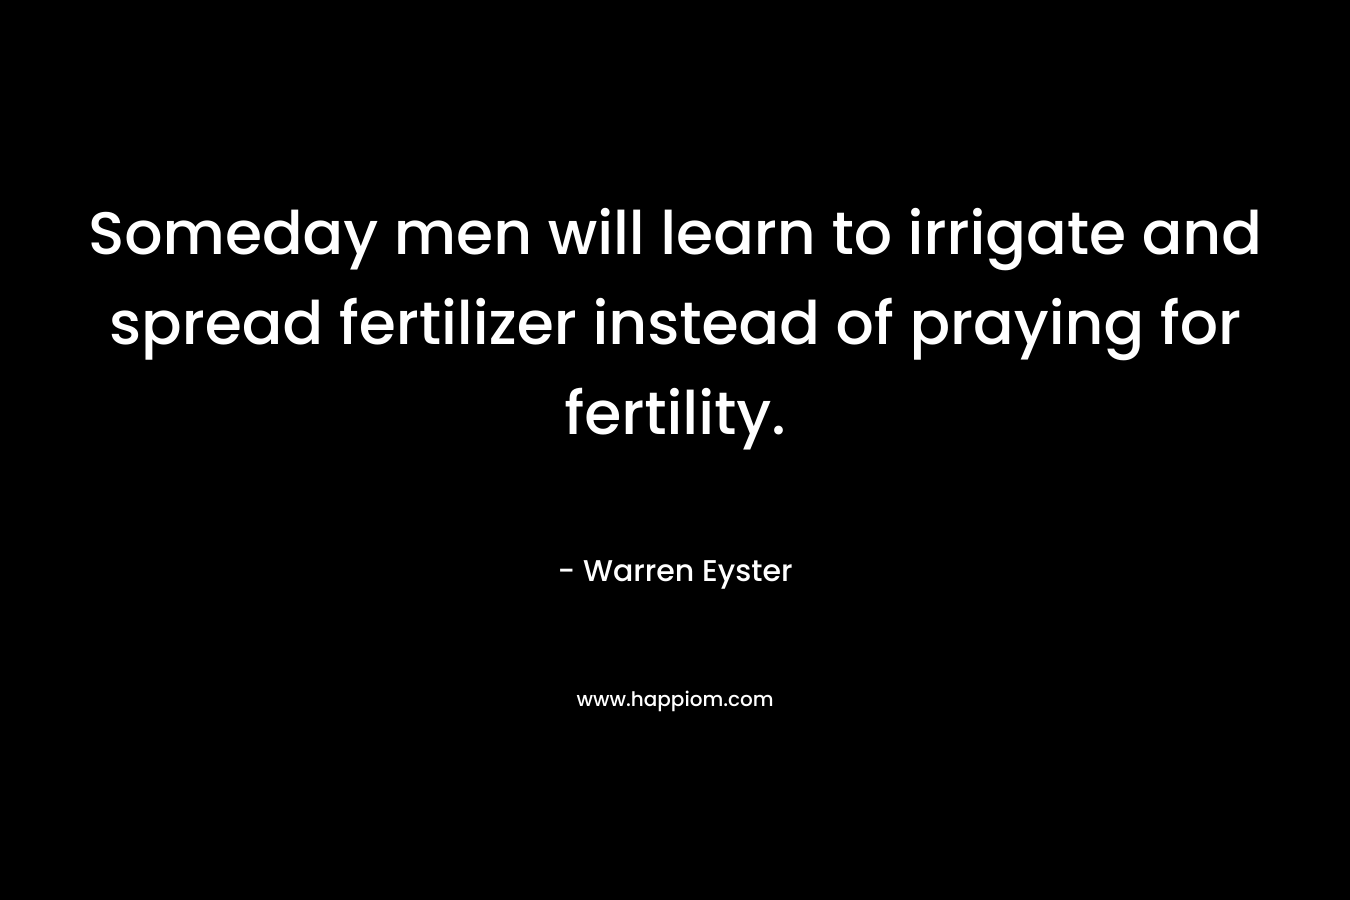 Someday men will learn to irrigate and spread fertilizer instead of praying for fertility.